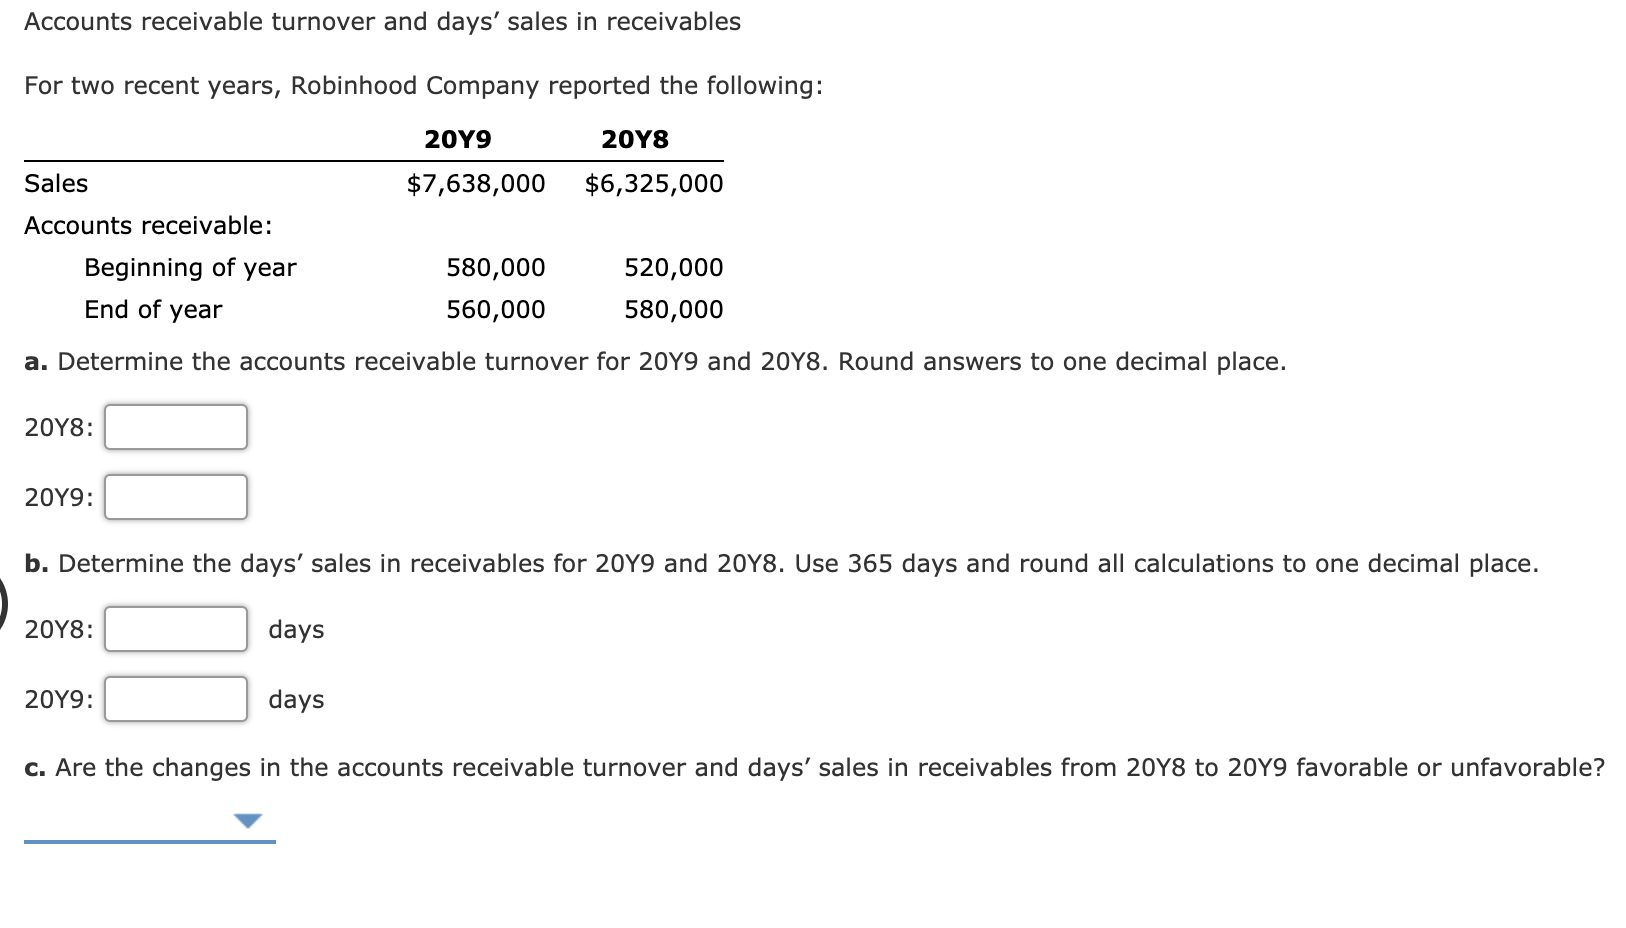 days account receivable turnover